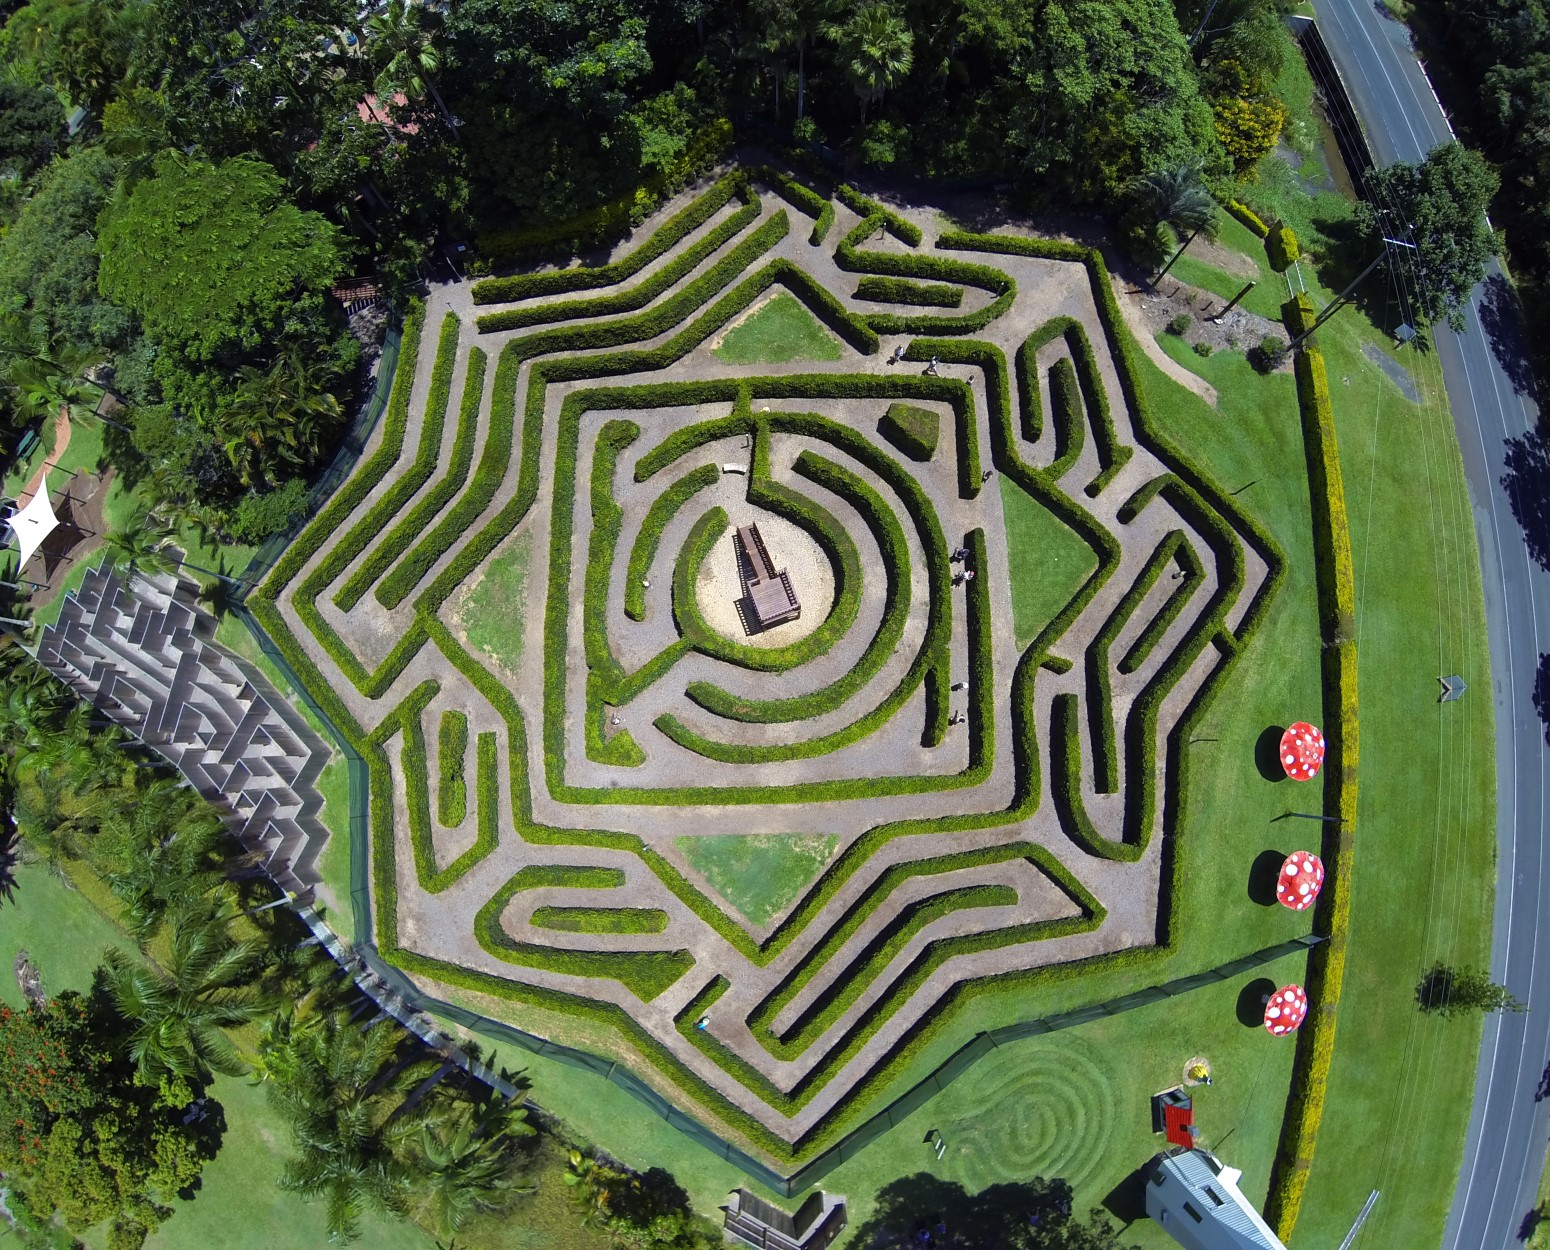 Bellingham Maze - Attractions Perth 1